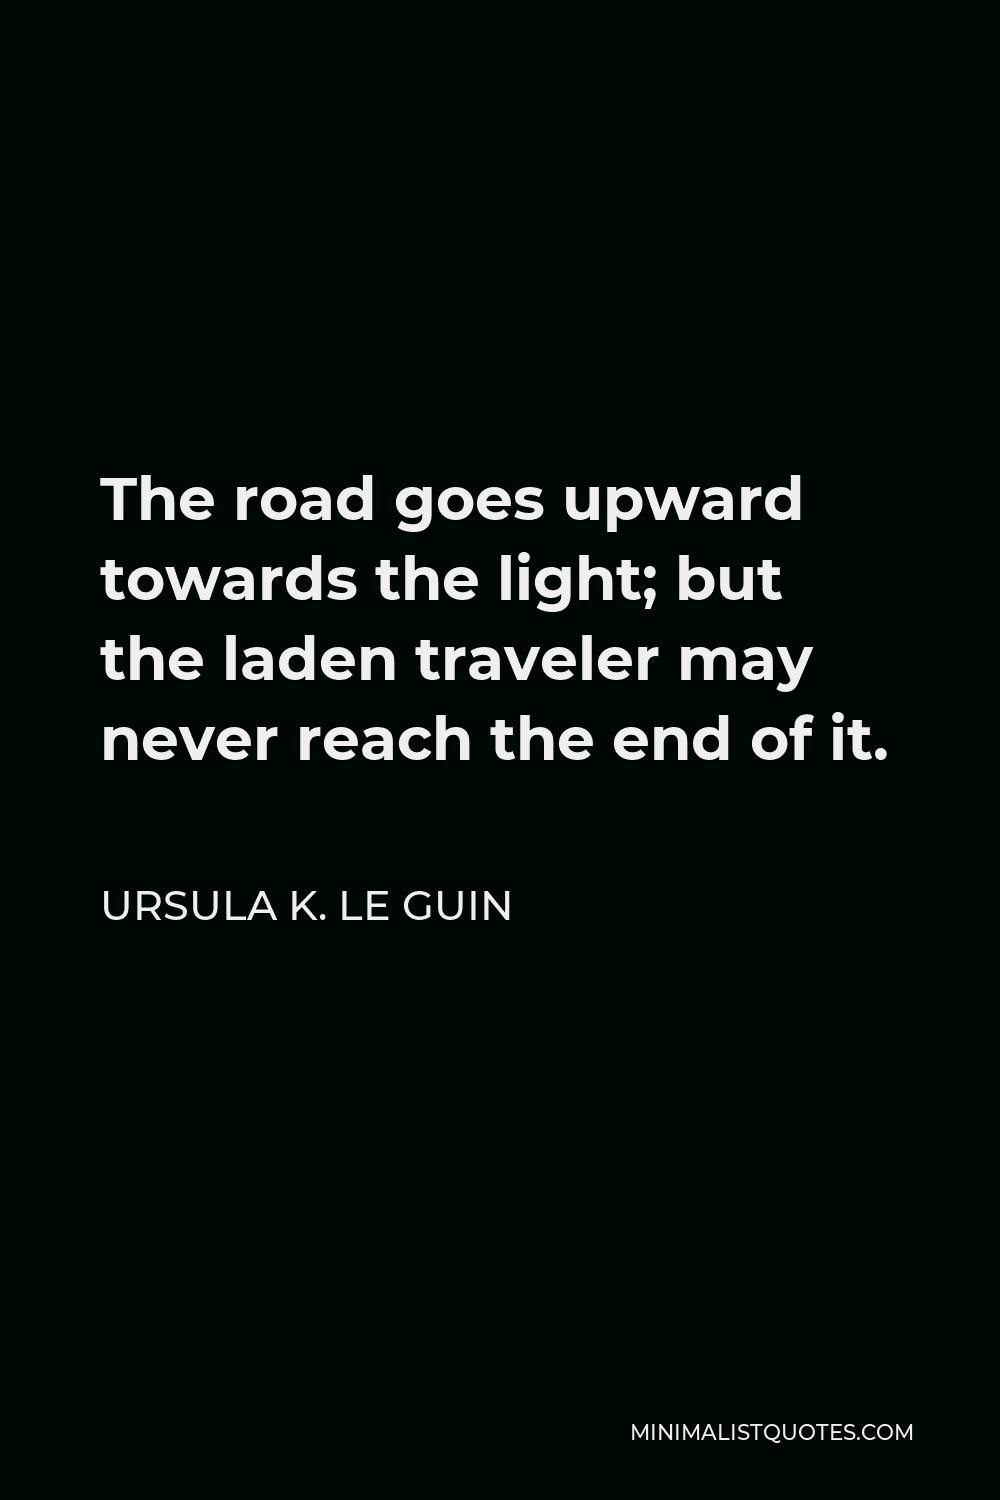 Ursula K. Le Guin Quote - The road goes upward towards the light; but the laden traveler may never reach the end of it.